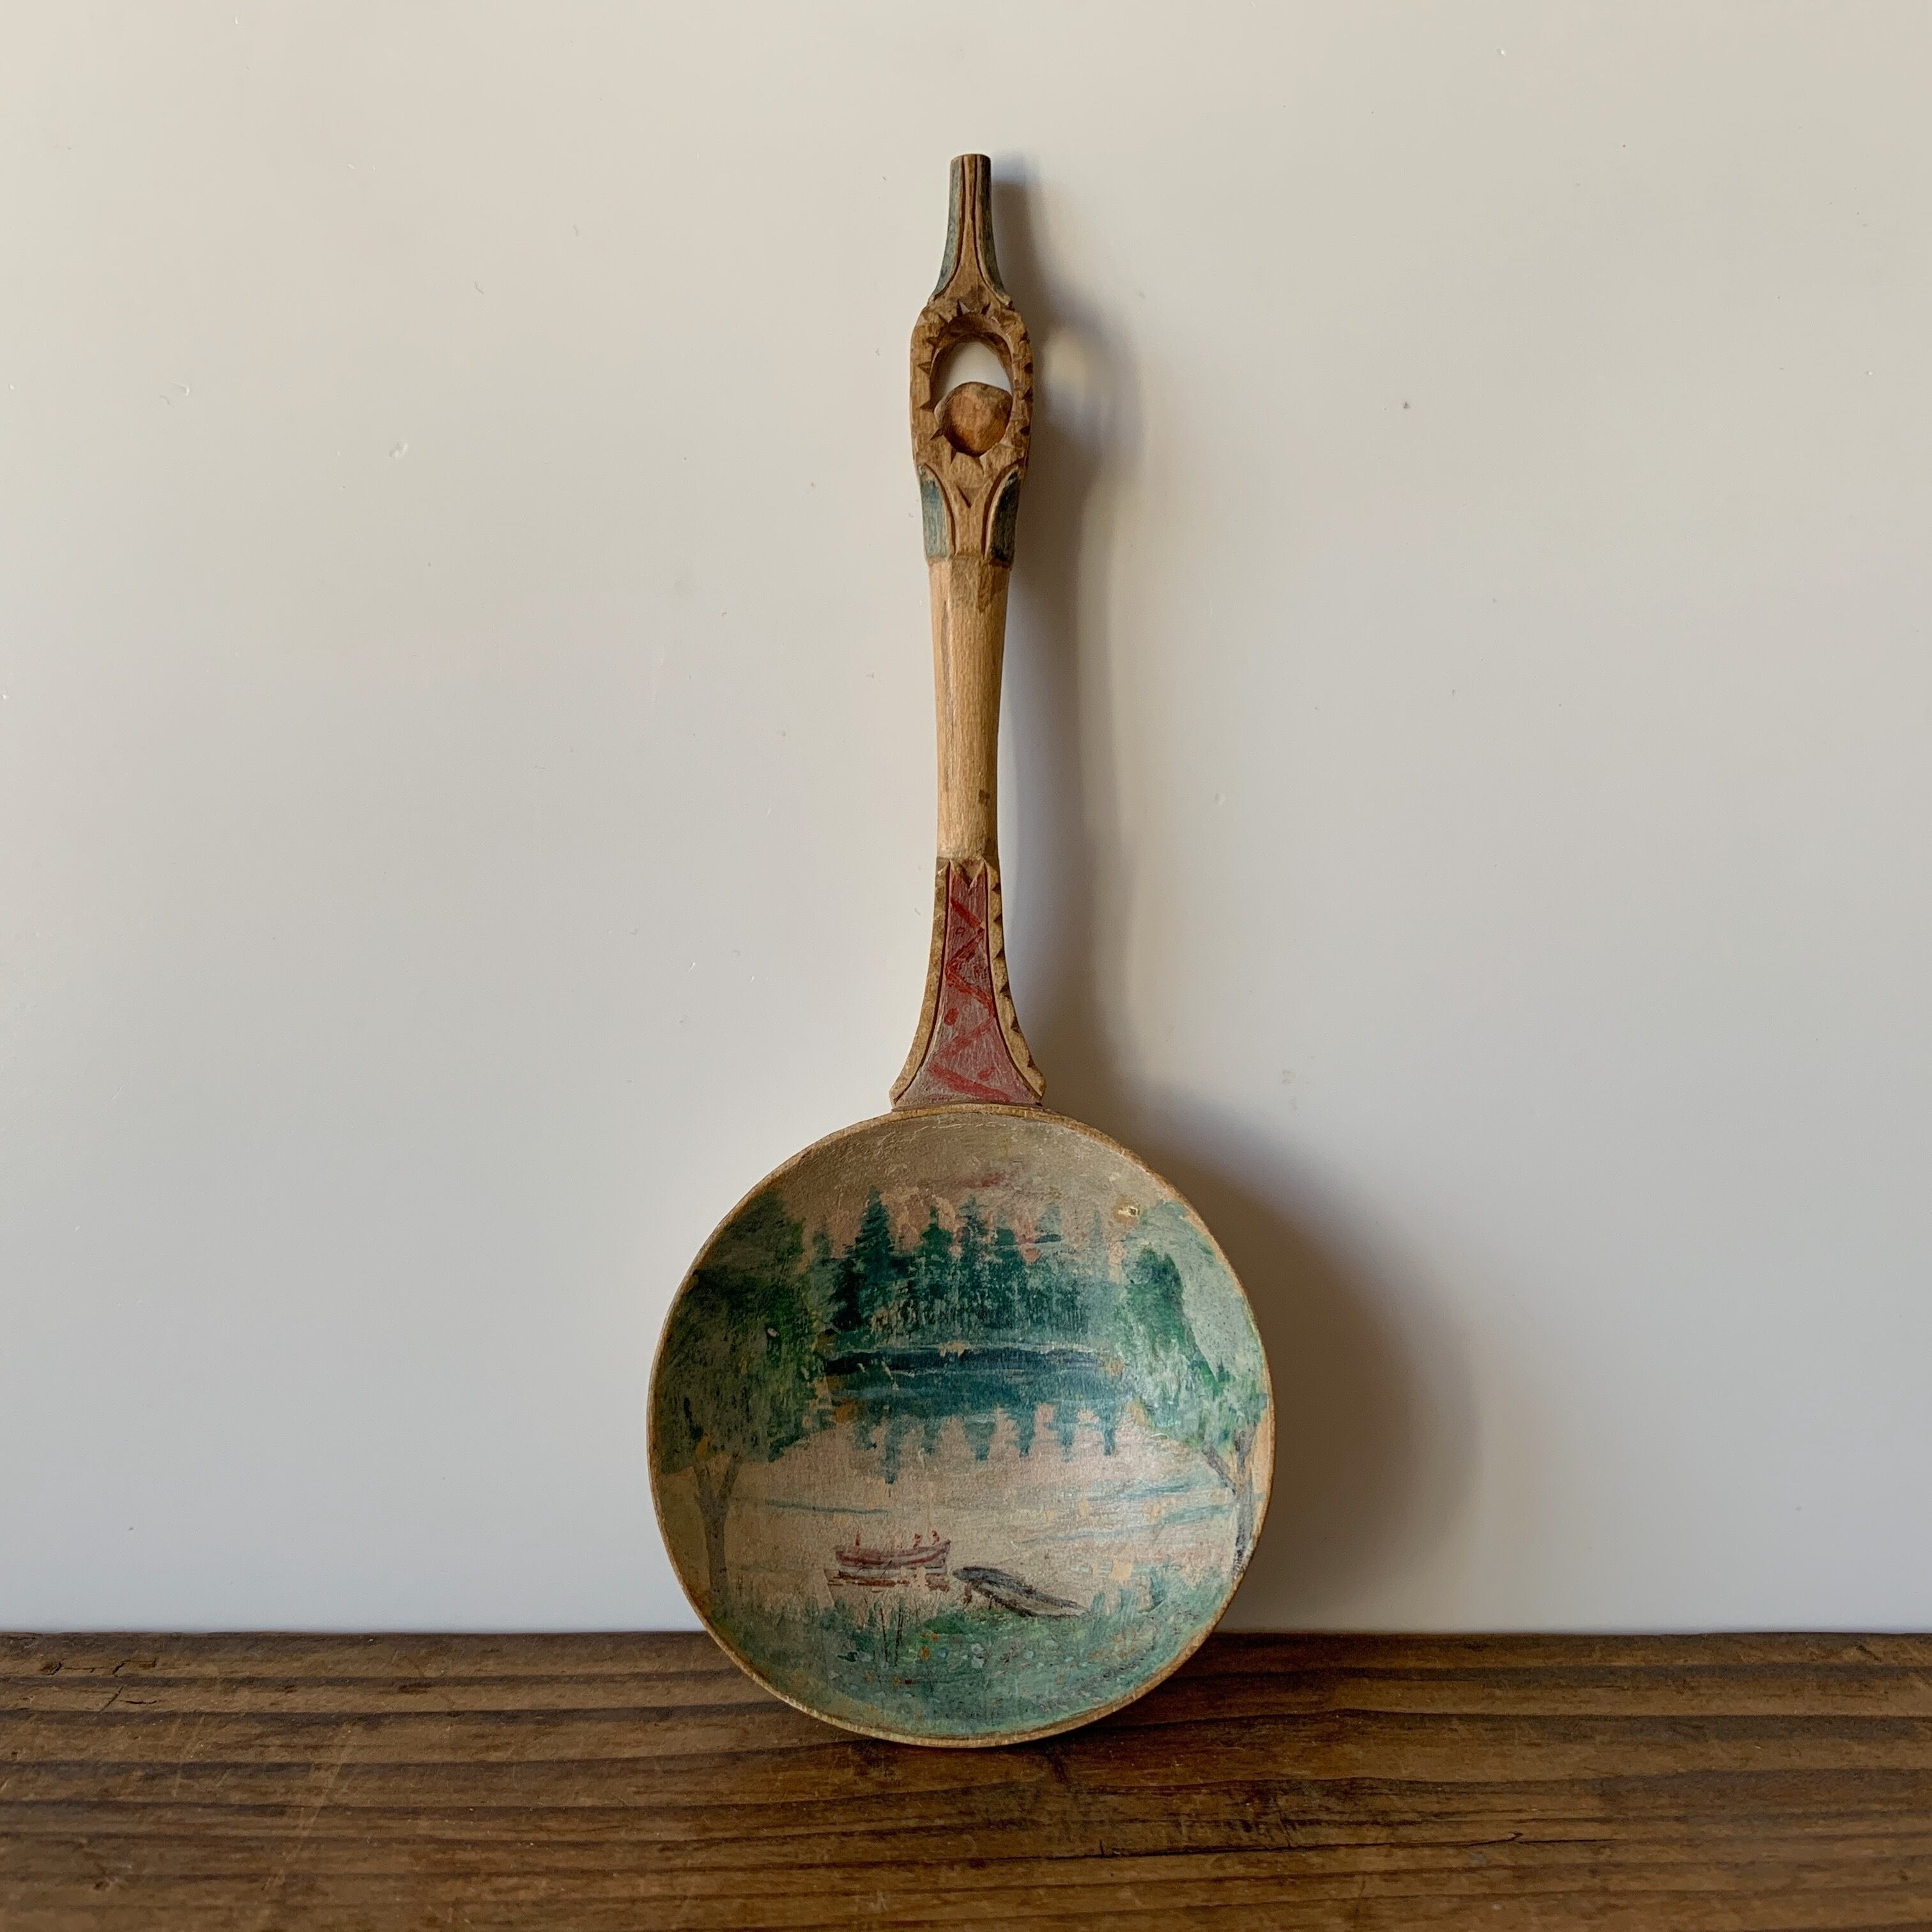 Wooden Spoon / Ronneby 1905 | troldhaugen antiques ｜ 北欧